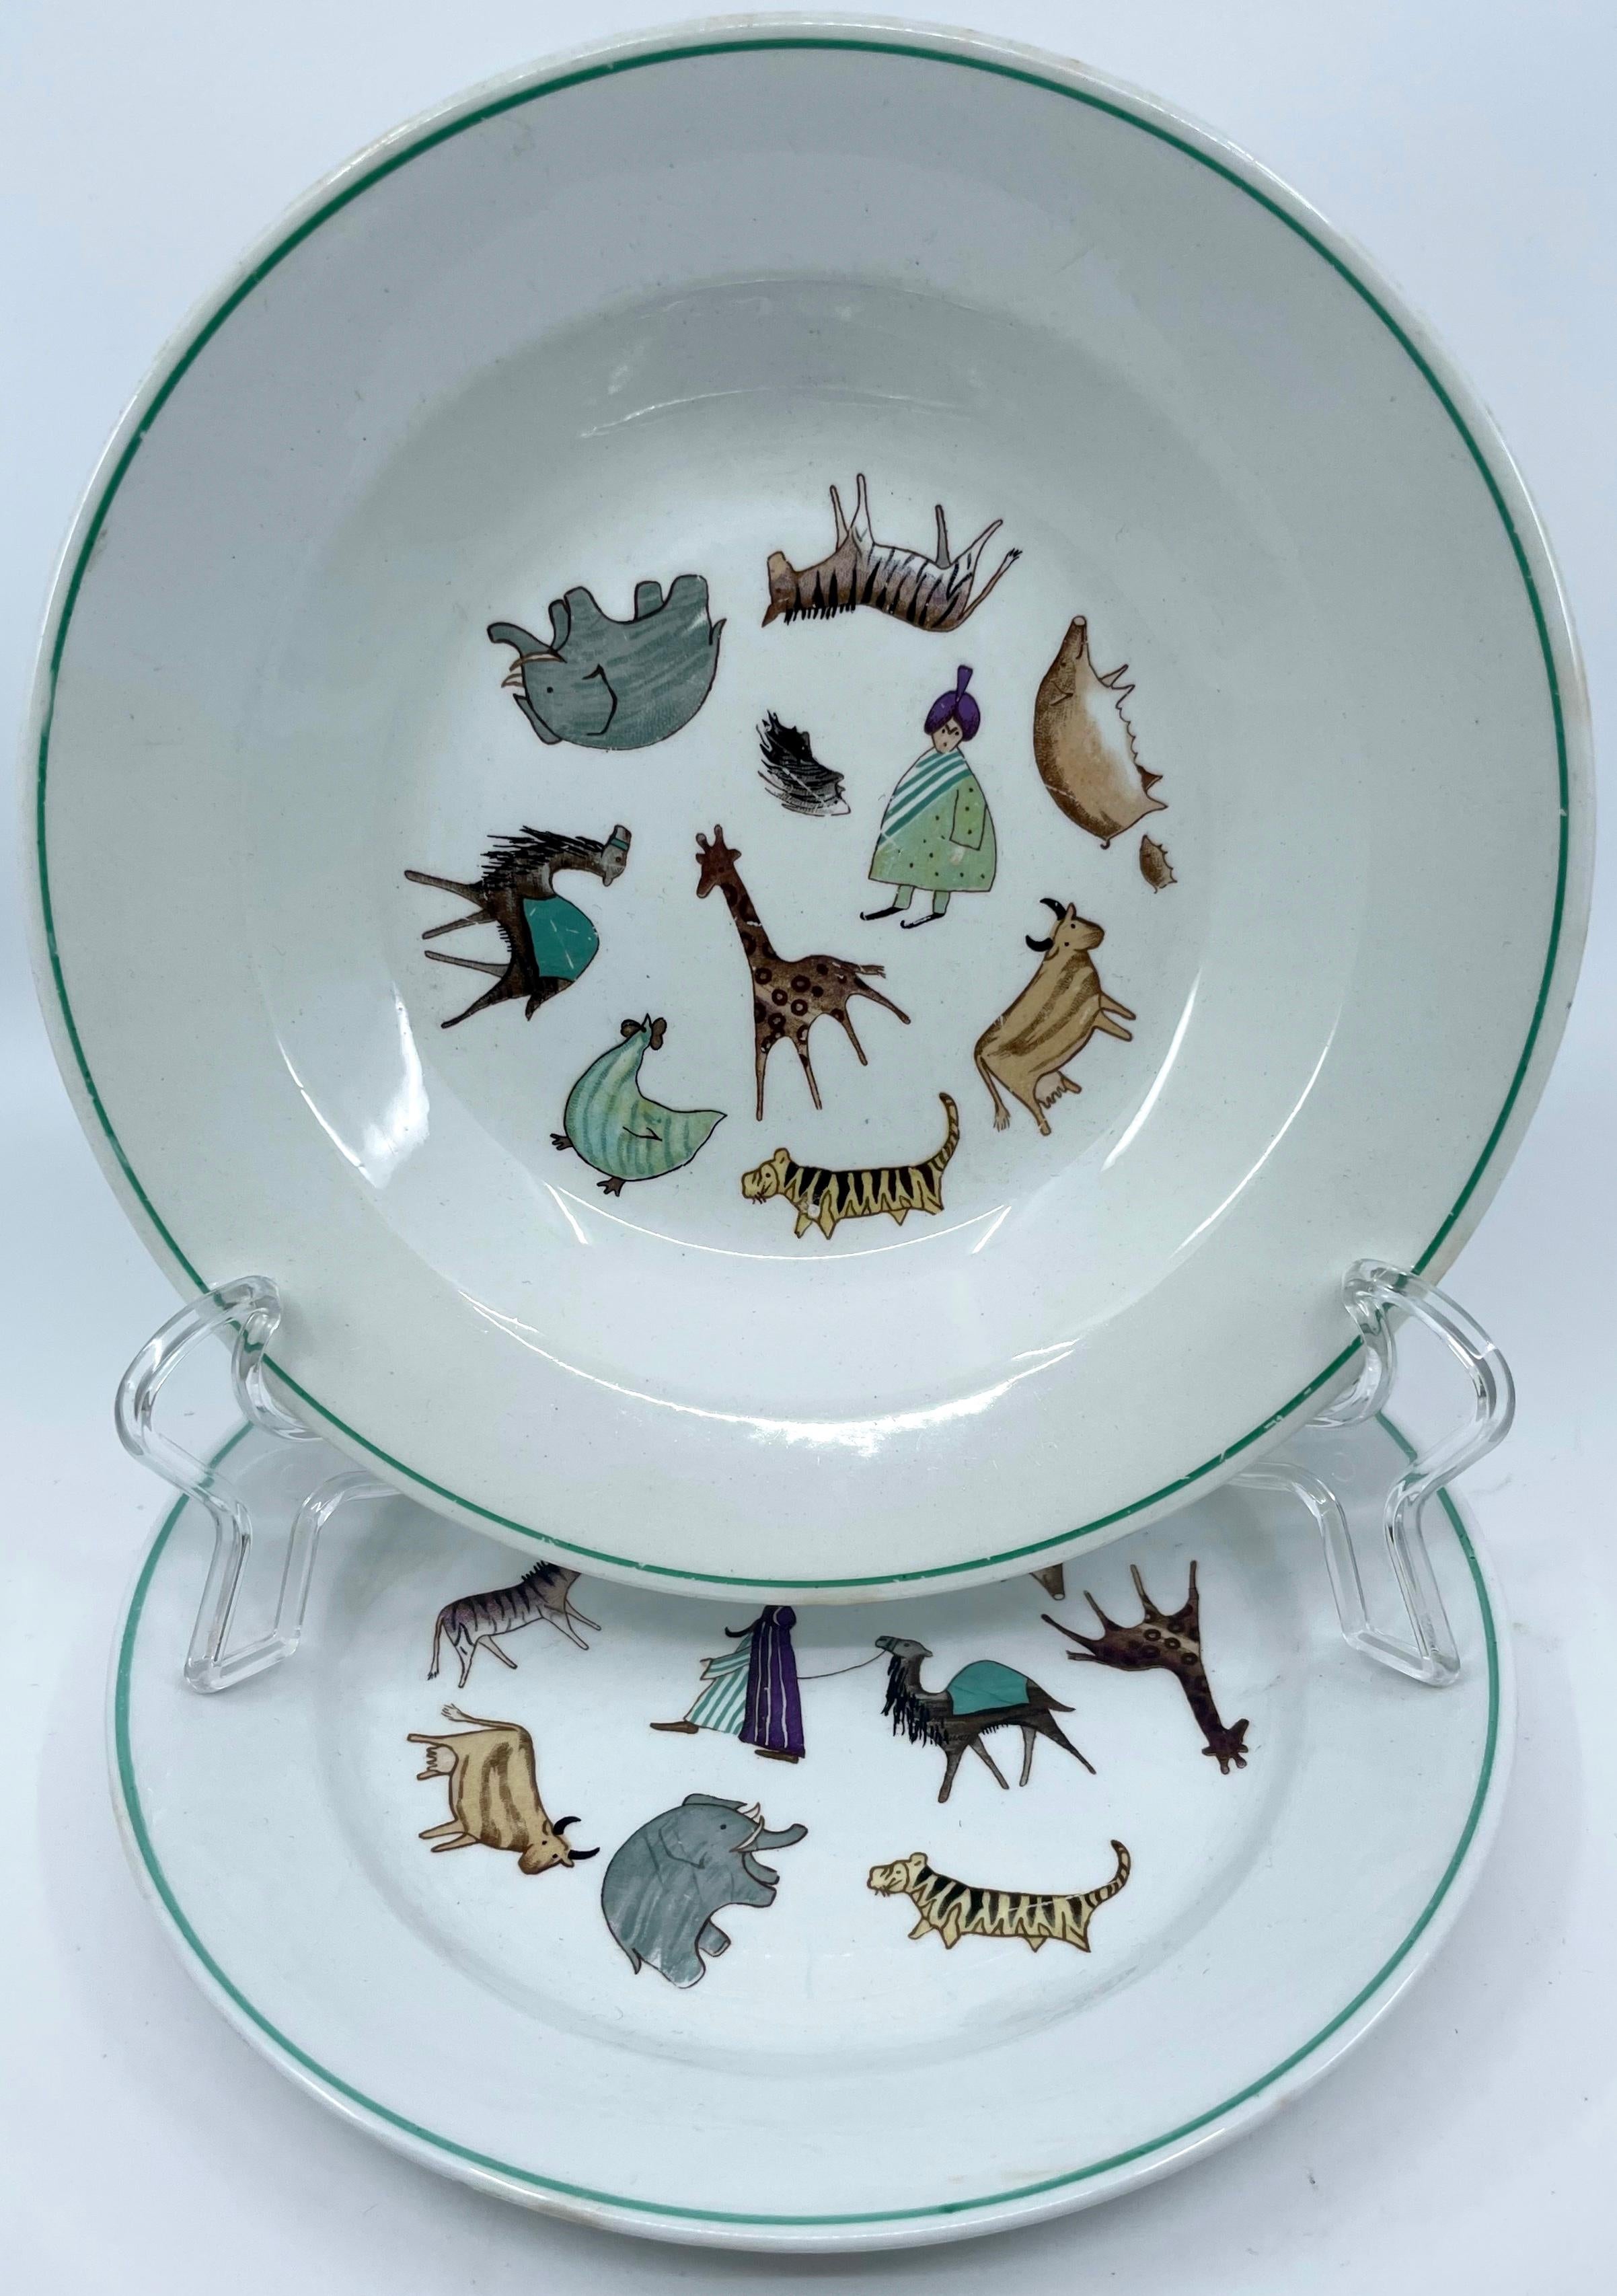 Animal parade child's plate and bowl set. Noah's ark animal parade child's plate and bowl set with markings for 